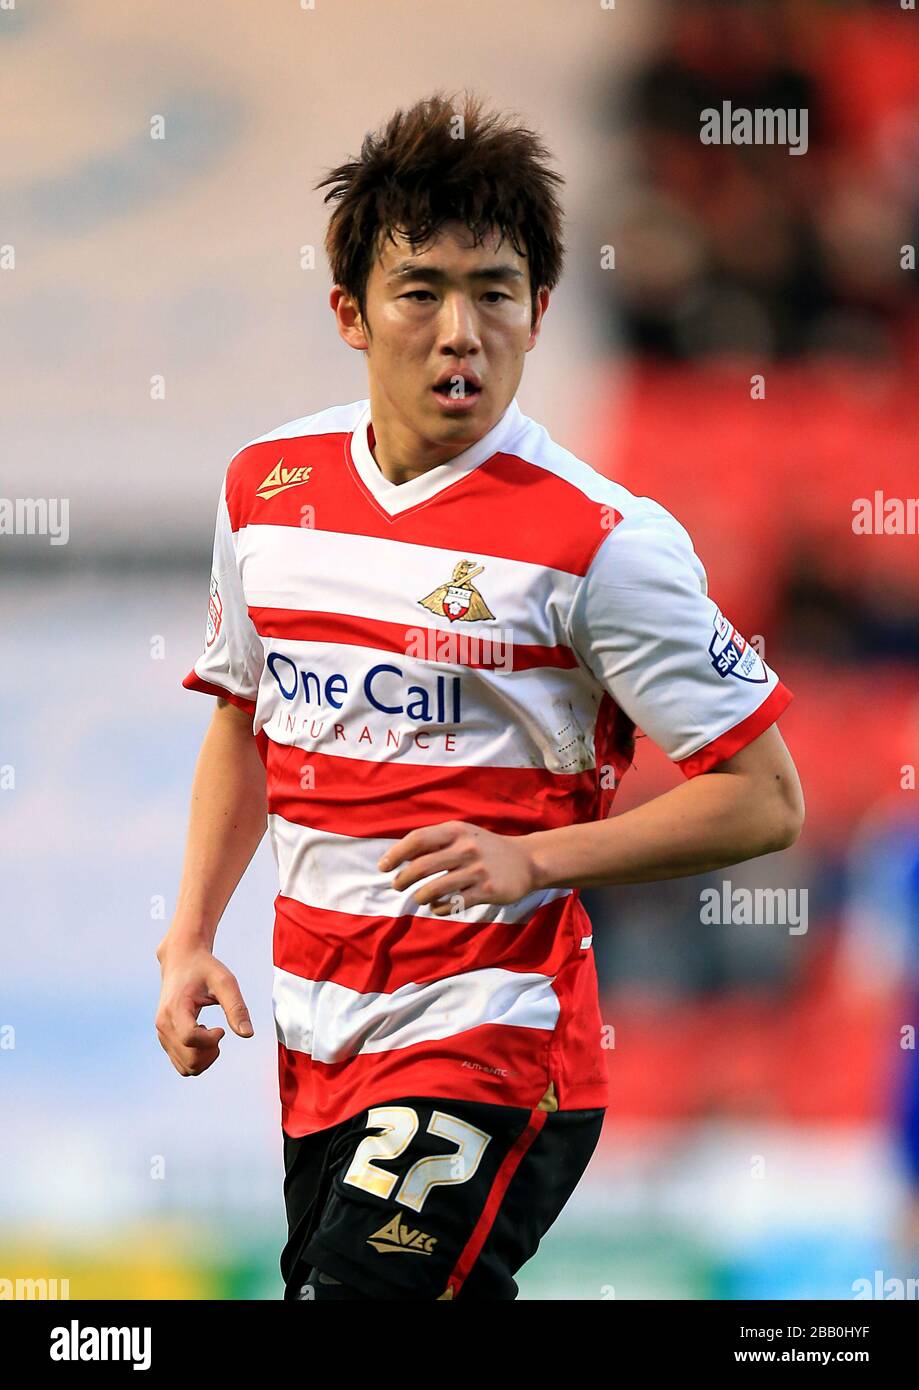 Suk-Young Yun, Doncaster Rovers Stock Photo